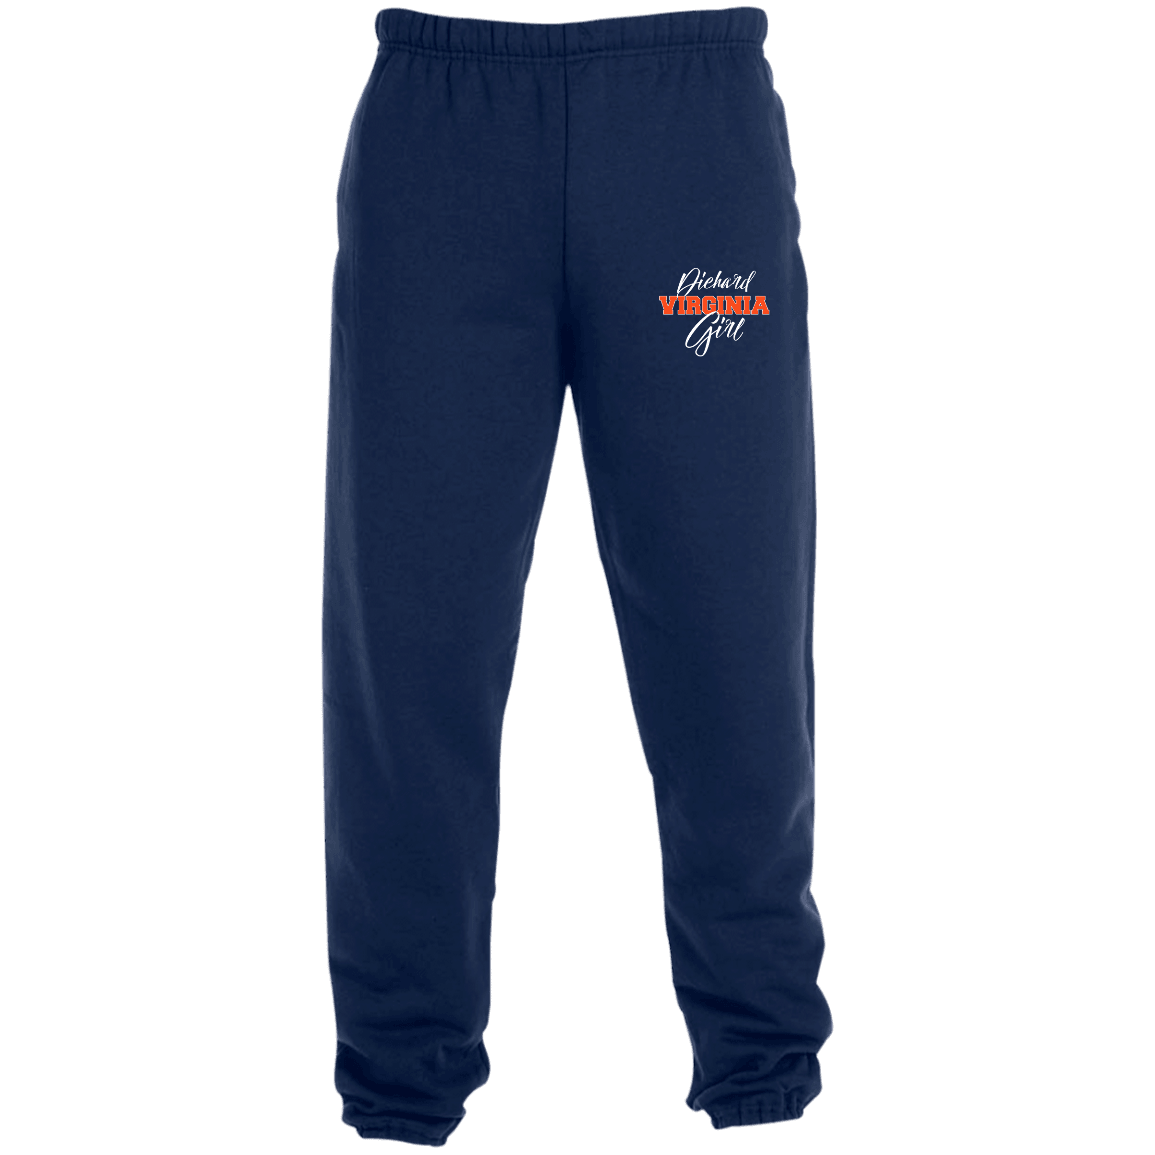 Designs by MyUtopia Shout Out:Diehard Virginia Girl Embroidered Jerzees Unisex Sweatpants with Pockets - Navy Blue,True Navy / S,Pants